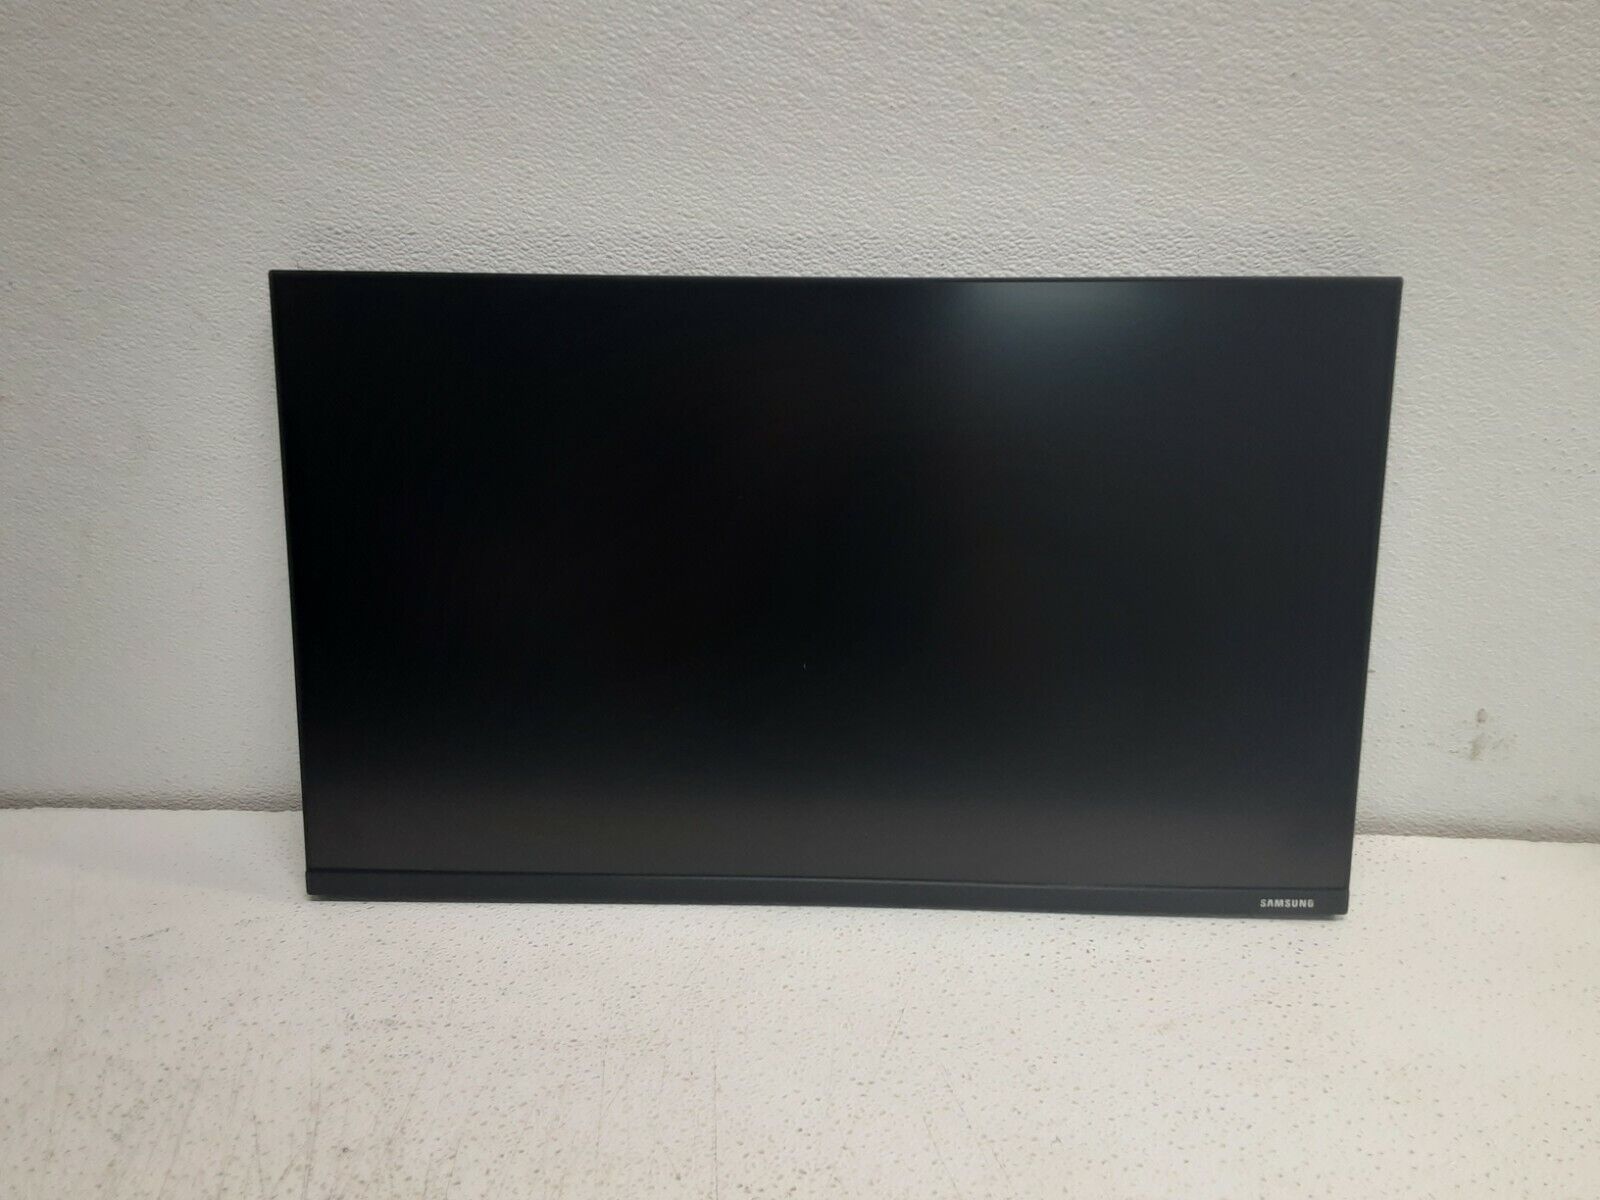 PC/タブレット ディスプレイ Samsung S27R750QEN SR75 27in. Widescreen LED Monitor - Black for 